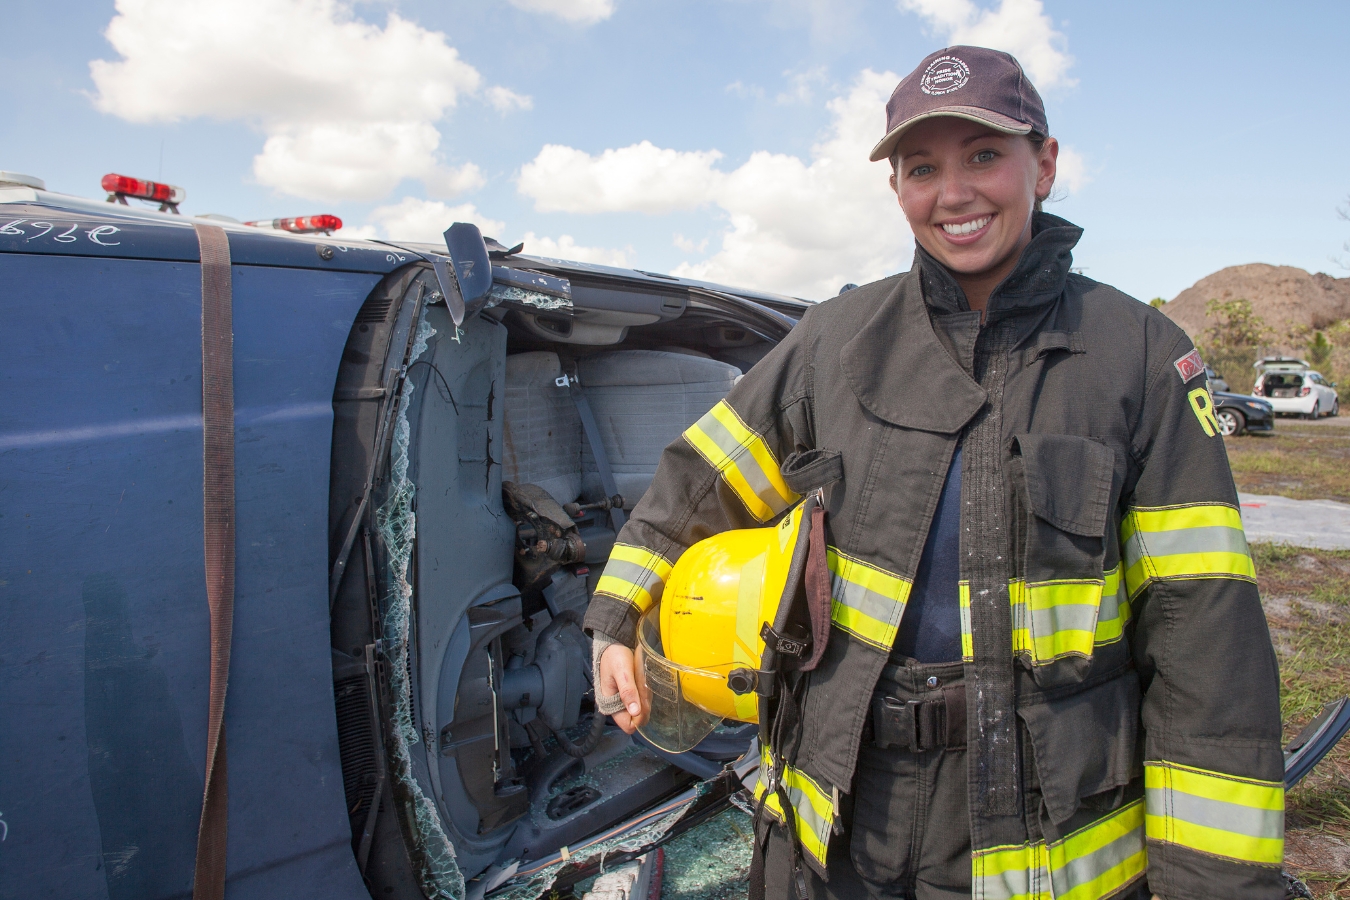 firefighter student poses in front of a car without its room with a smile while holding her helmet